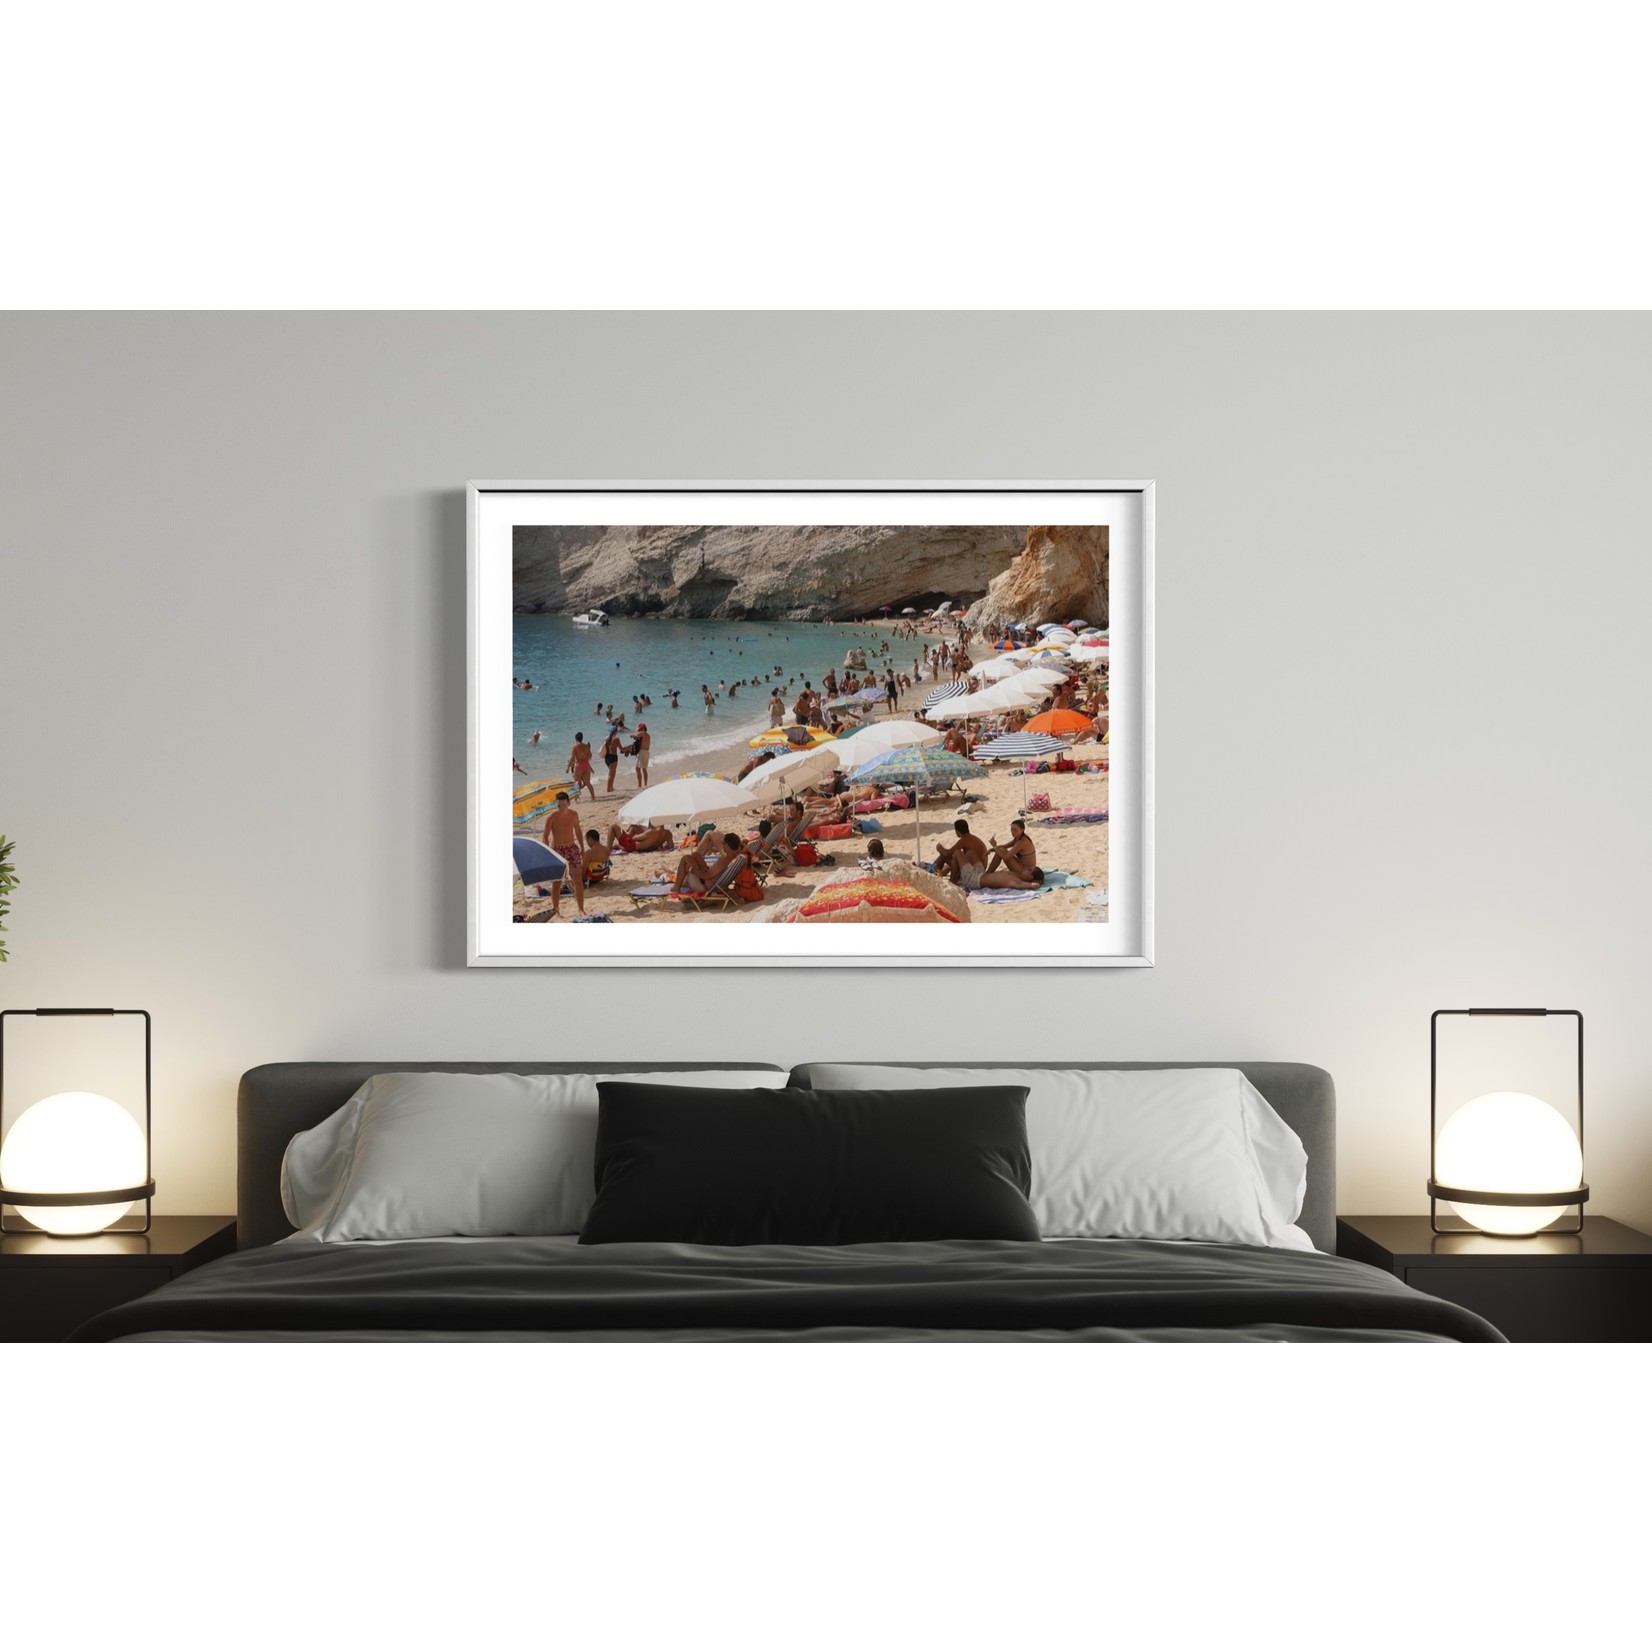 Framed Print on Rag Paper: Beaches Draw Summer Tourists To Lefkada Island by Sean Gallup via Getty Images Gallery